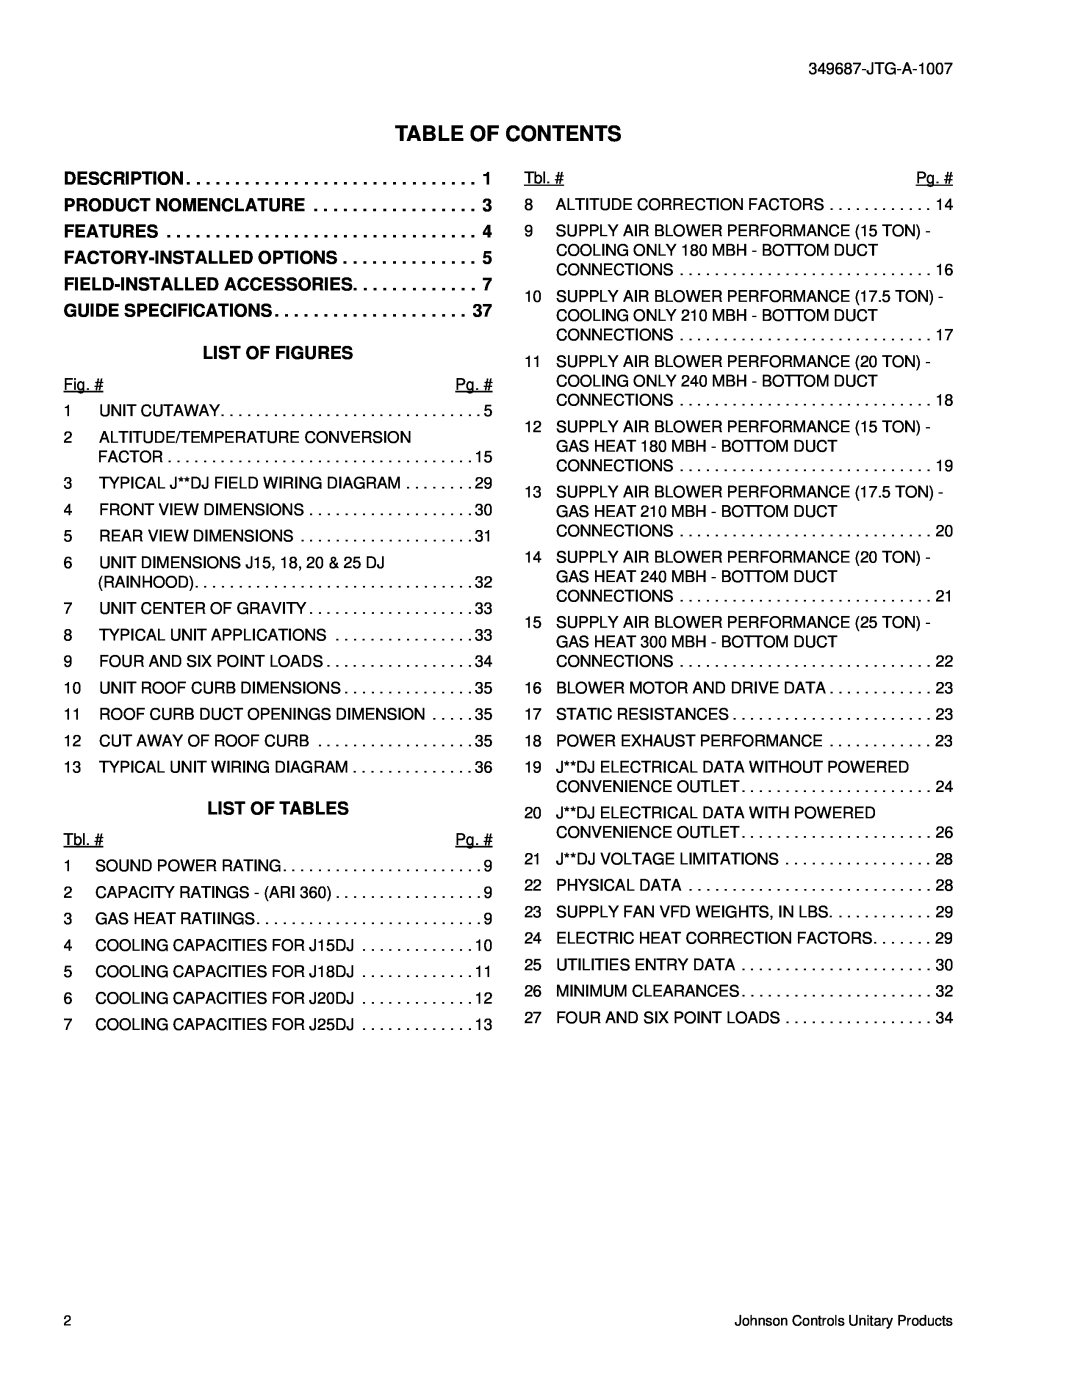 Johnson Controls J15 warranty Table Of Contents, List Of Figures, List Of Tables 